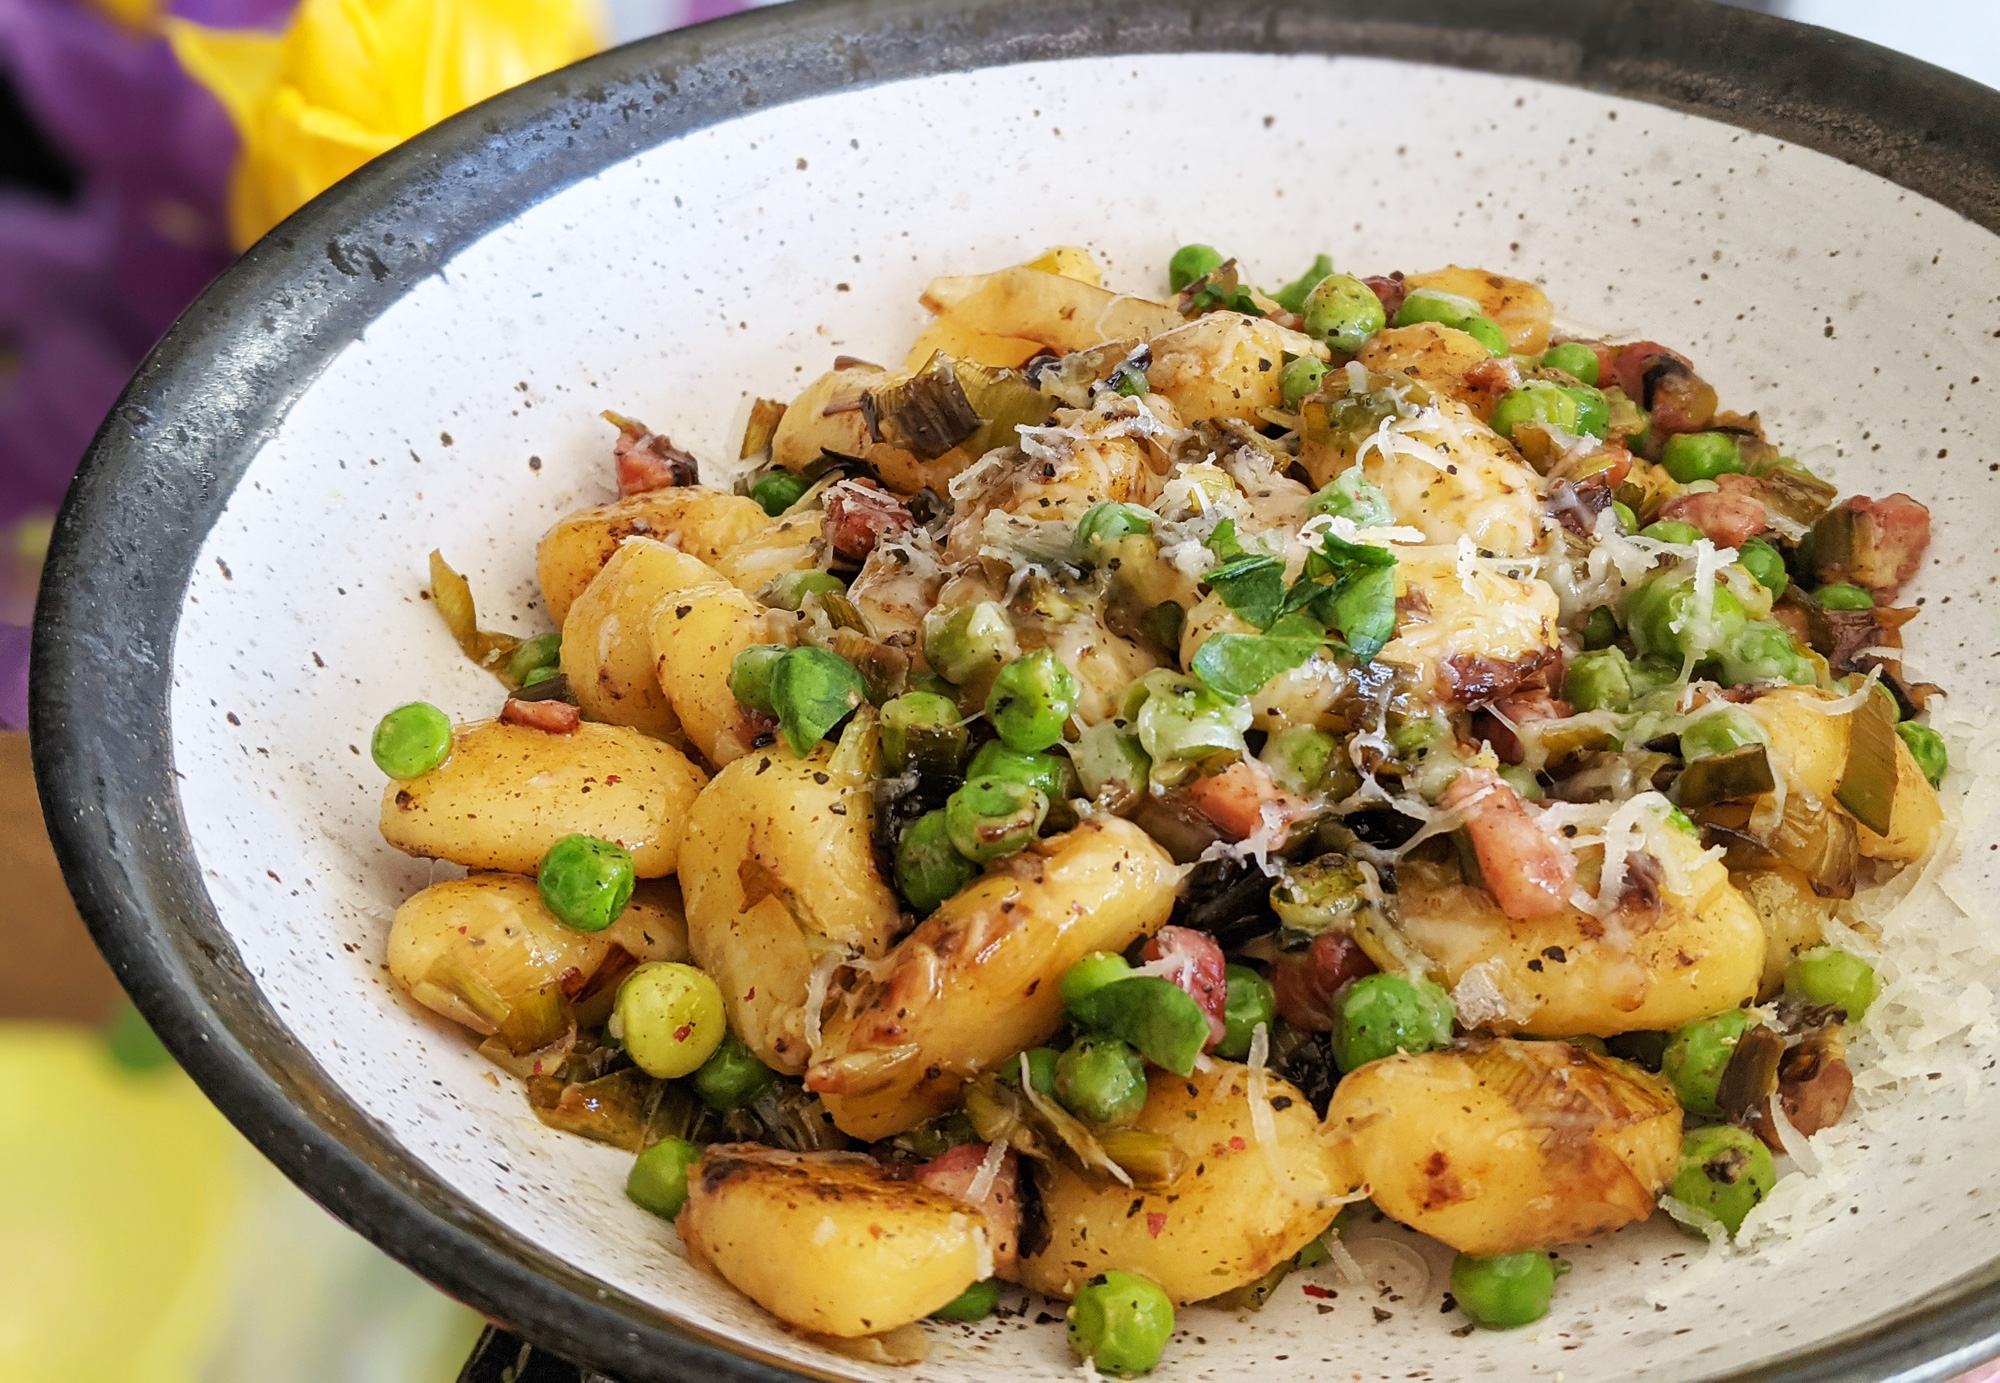 Pan-fried Gnocchi with Pancetta, Leeks & Peas - My Gluten Free Guide